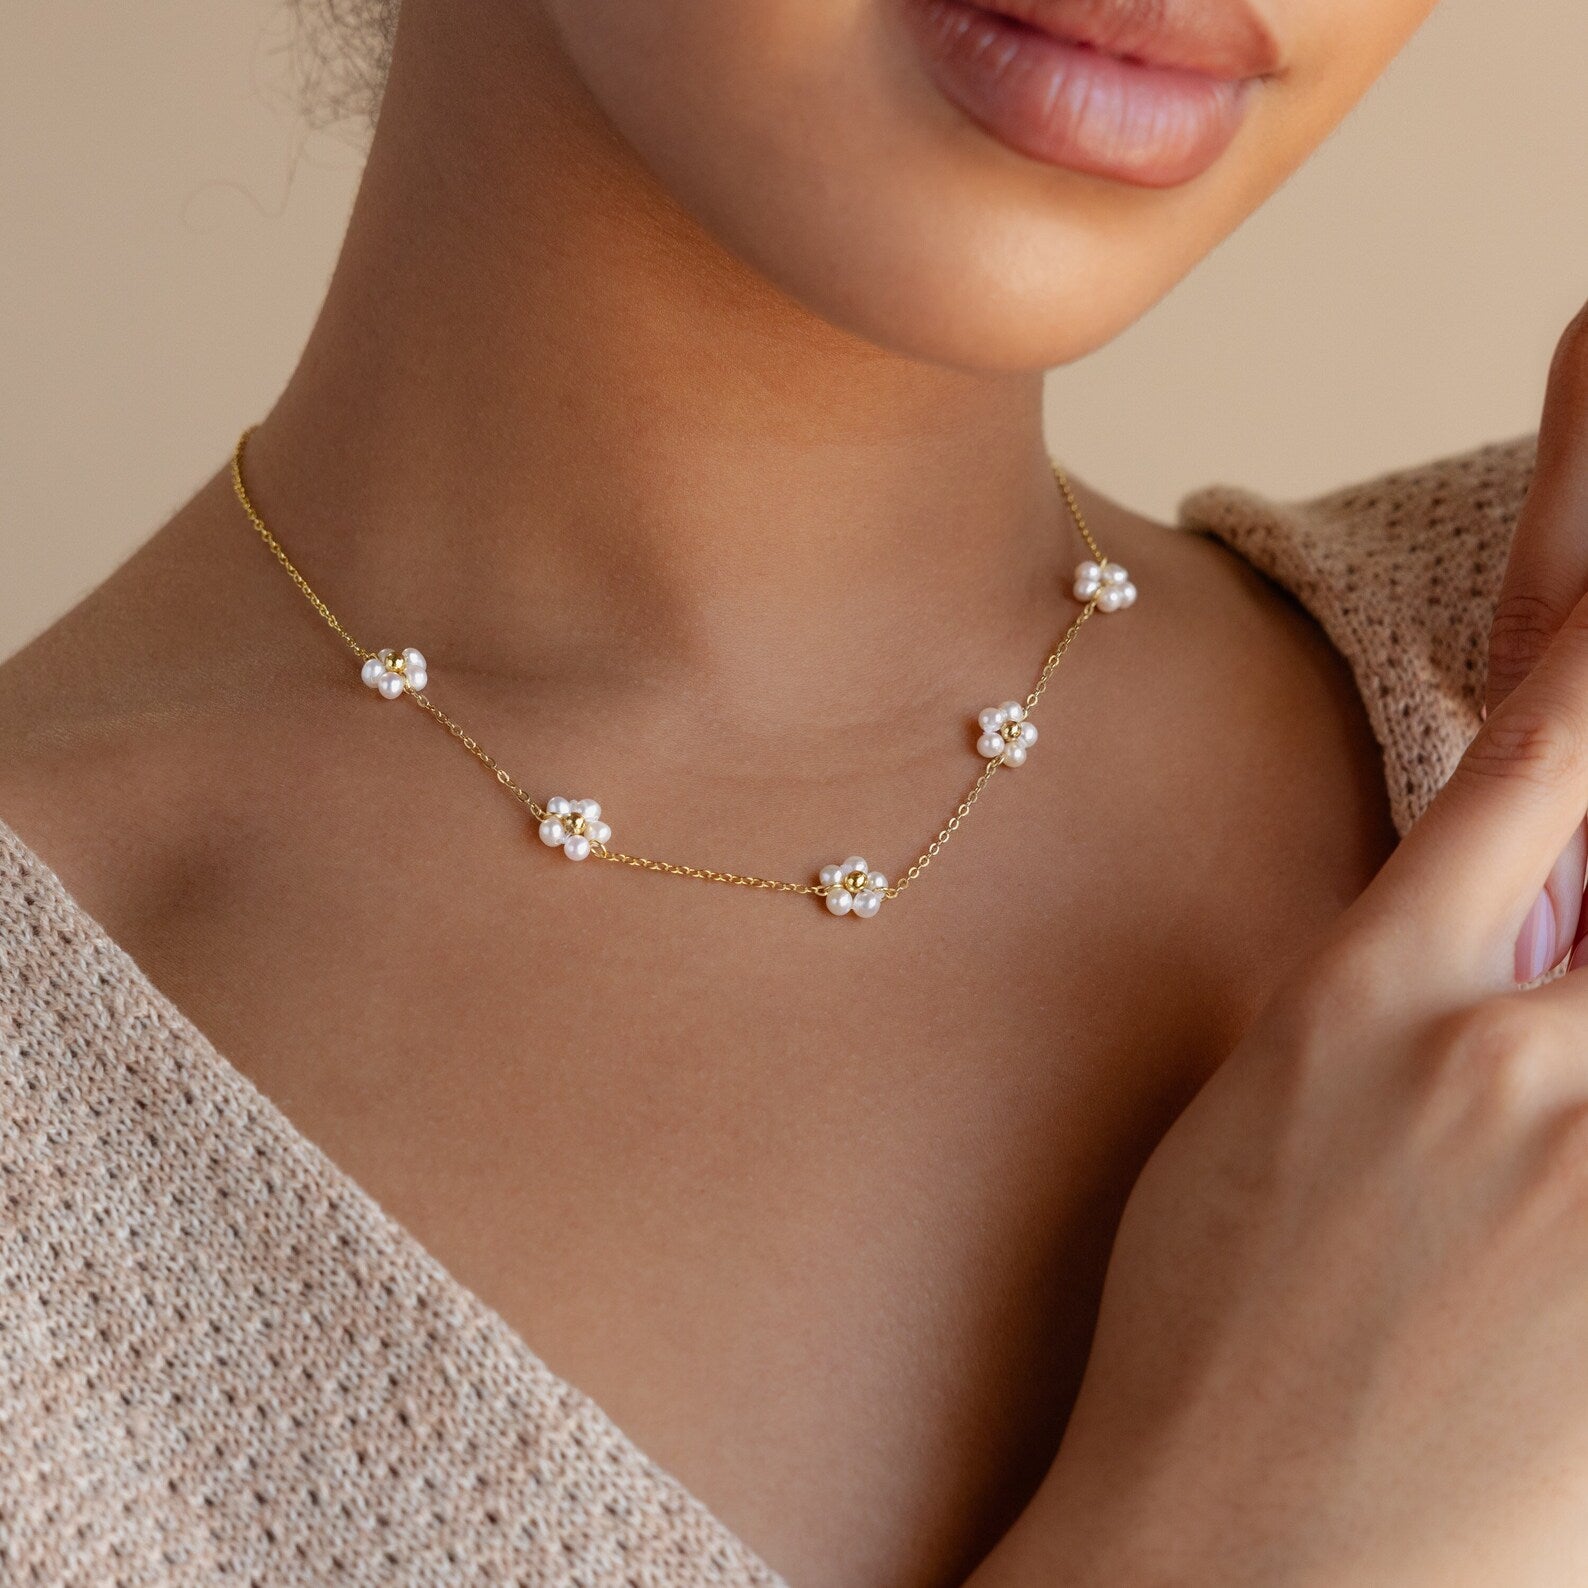 What does pearl necklace mean?